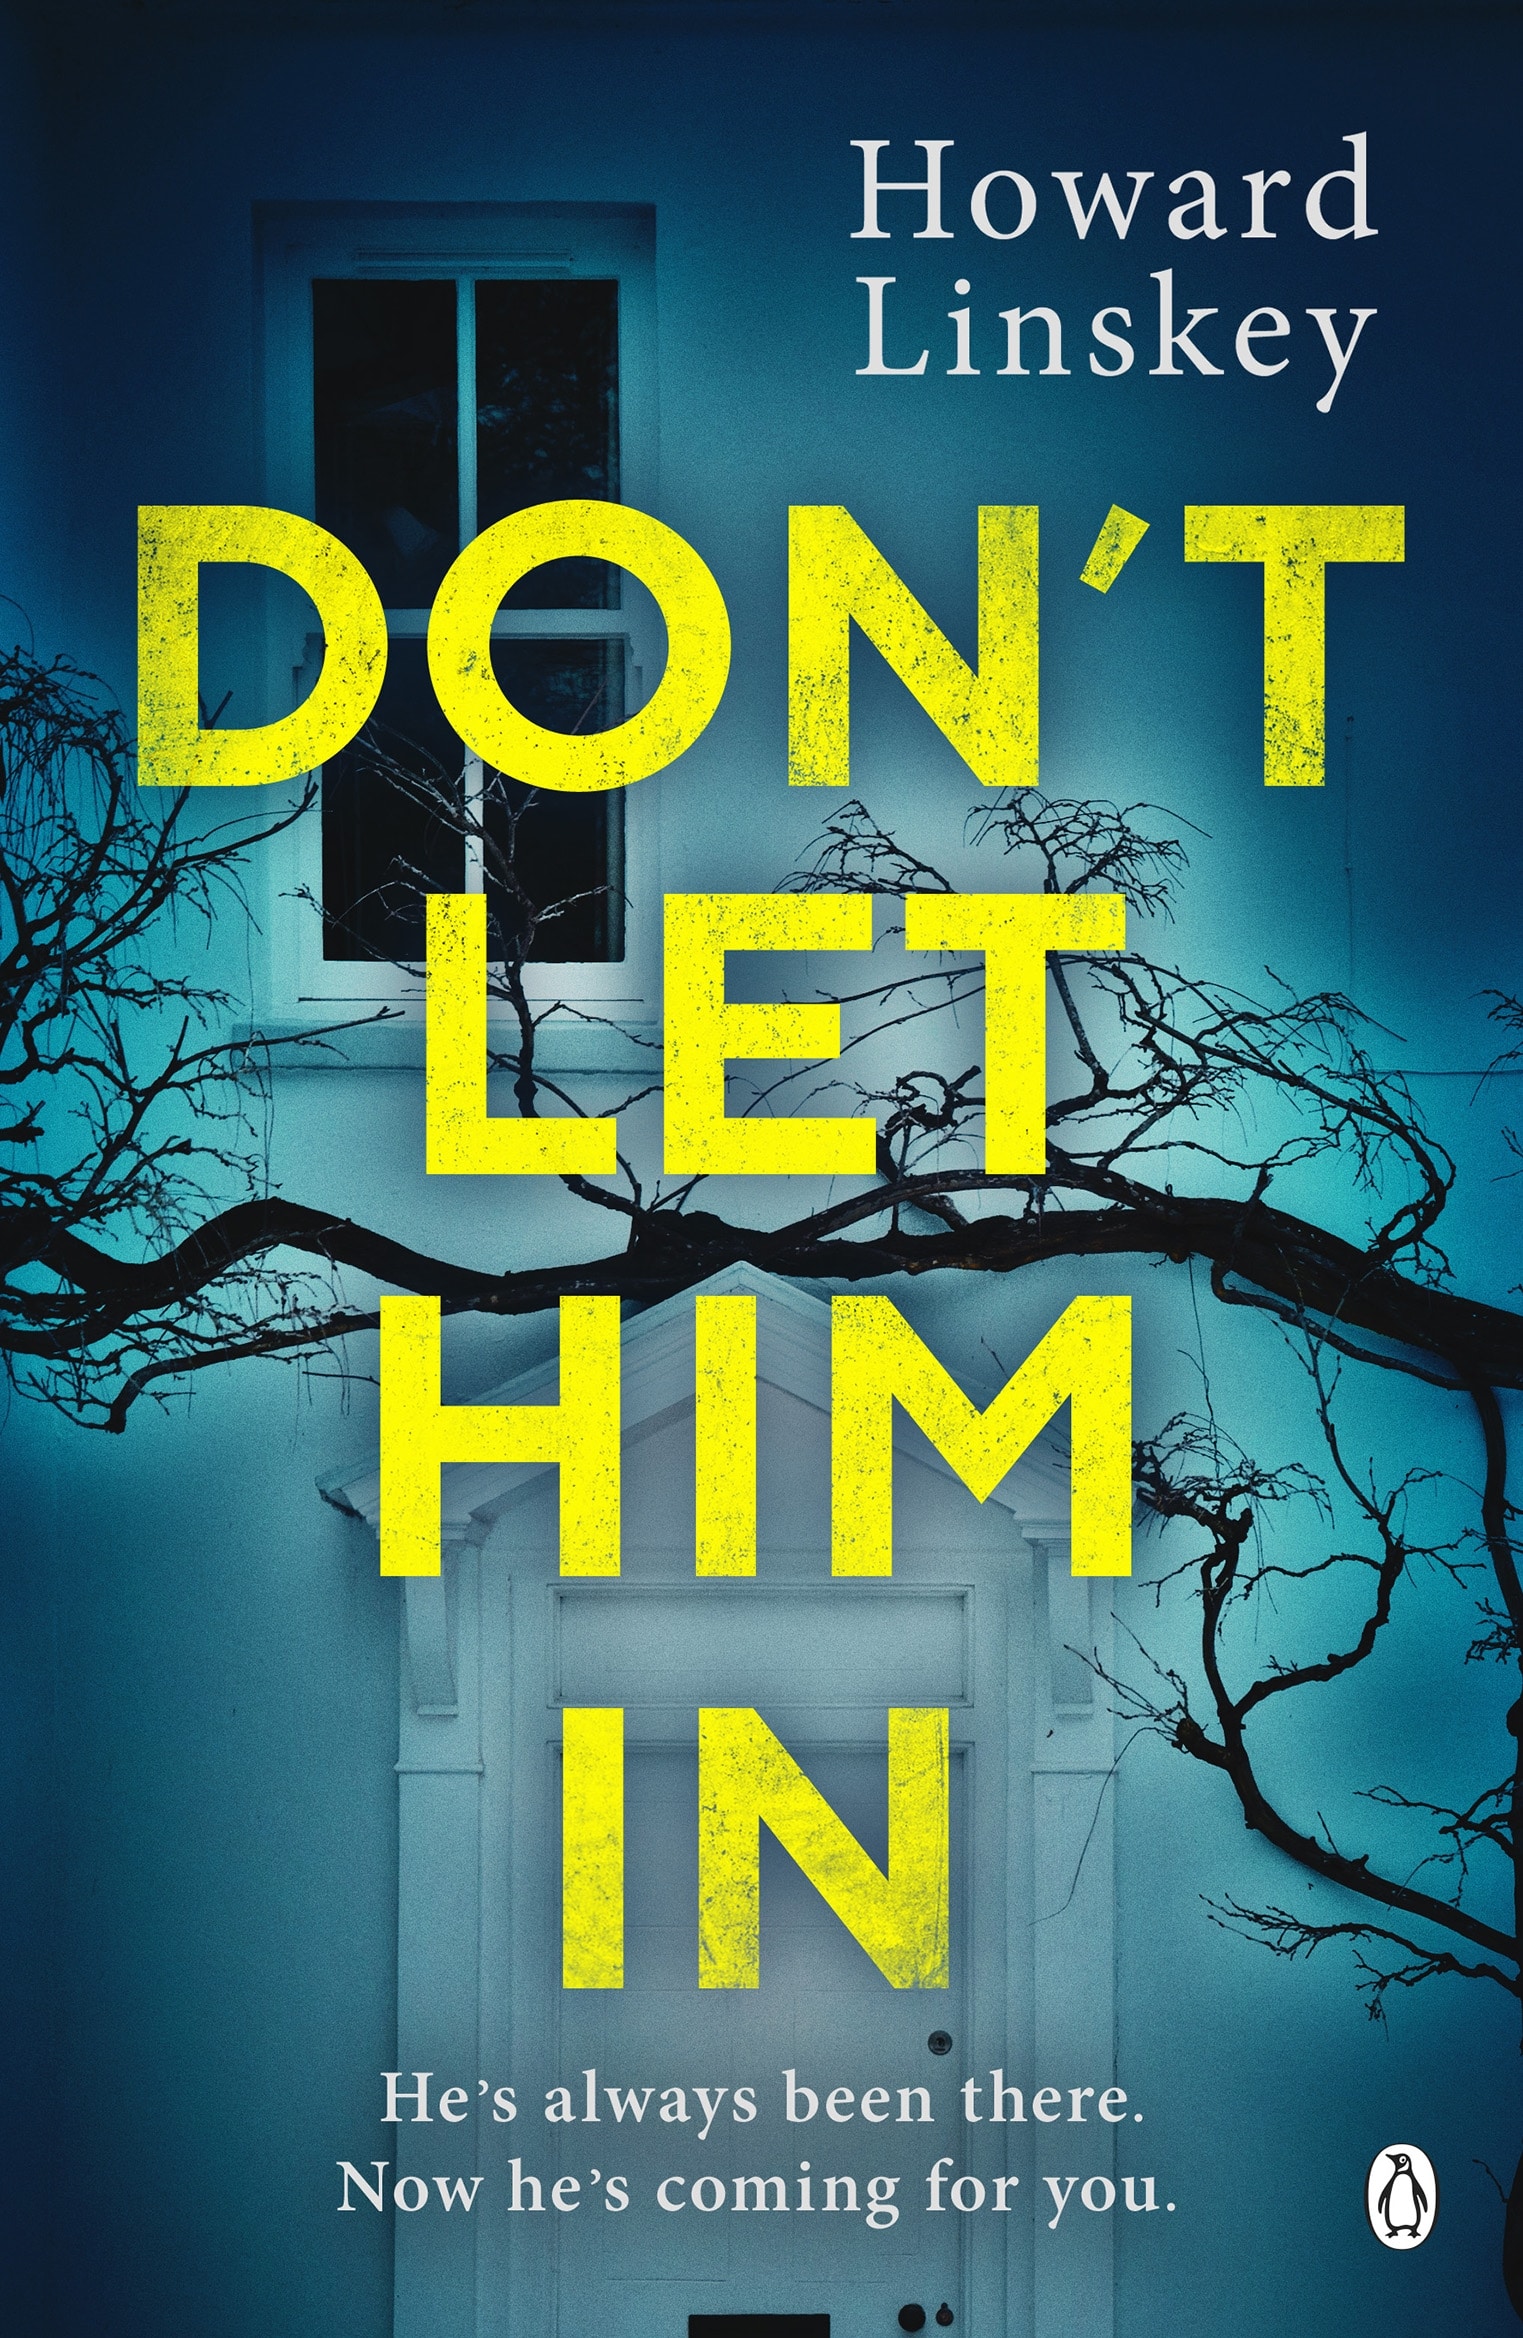 Book jacket of Don't Let Him In by Howard Linskey